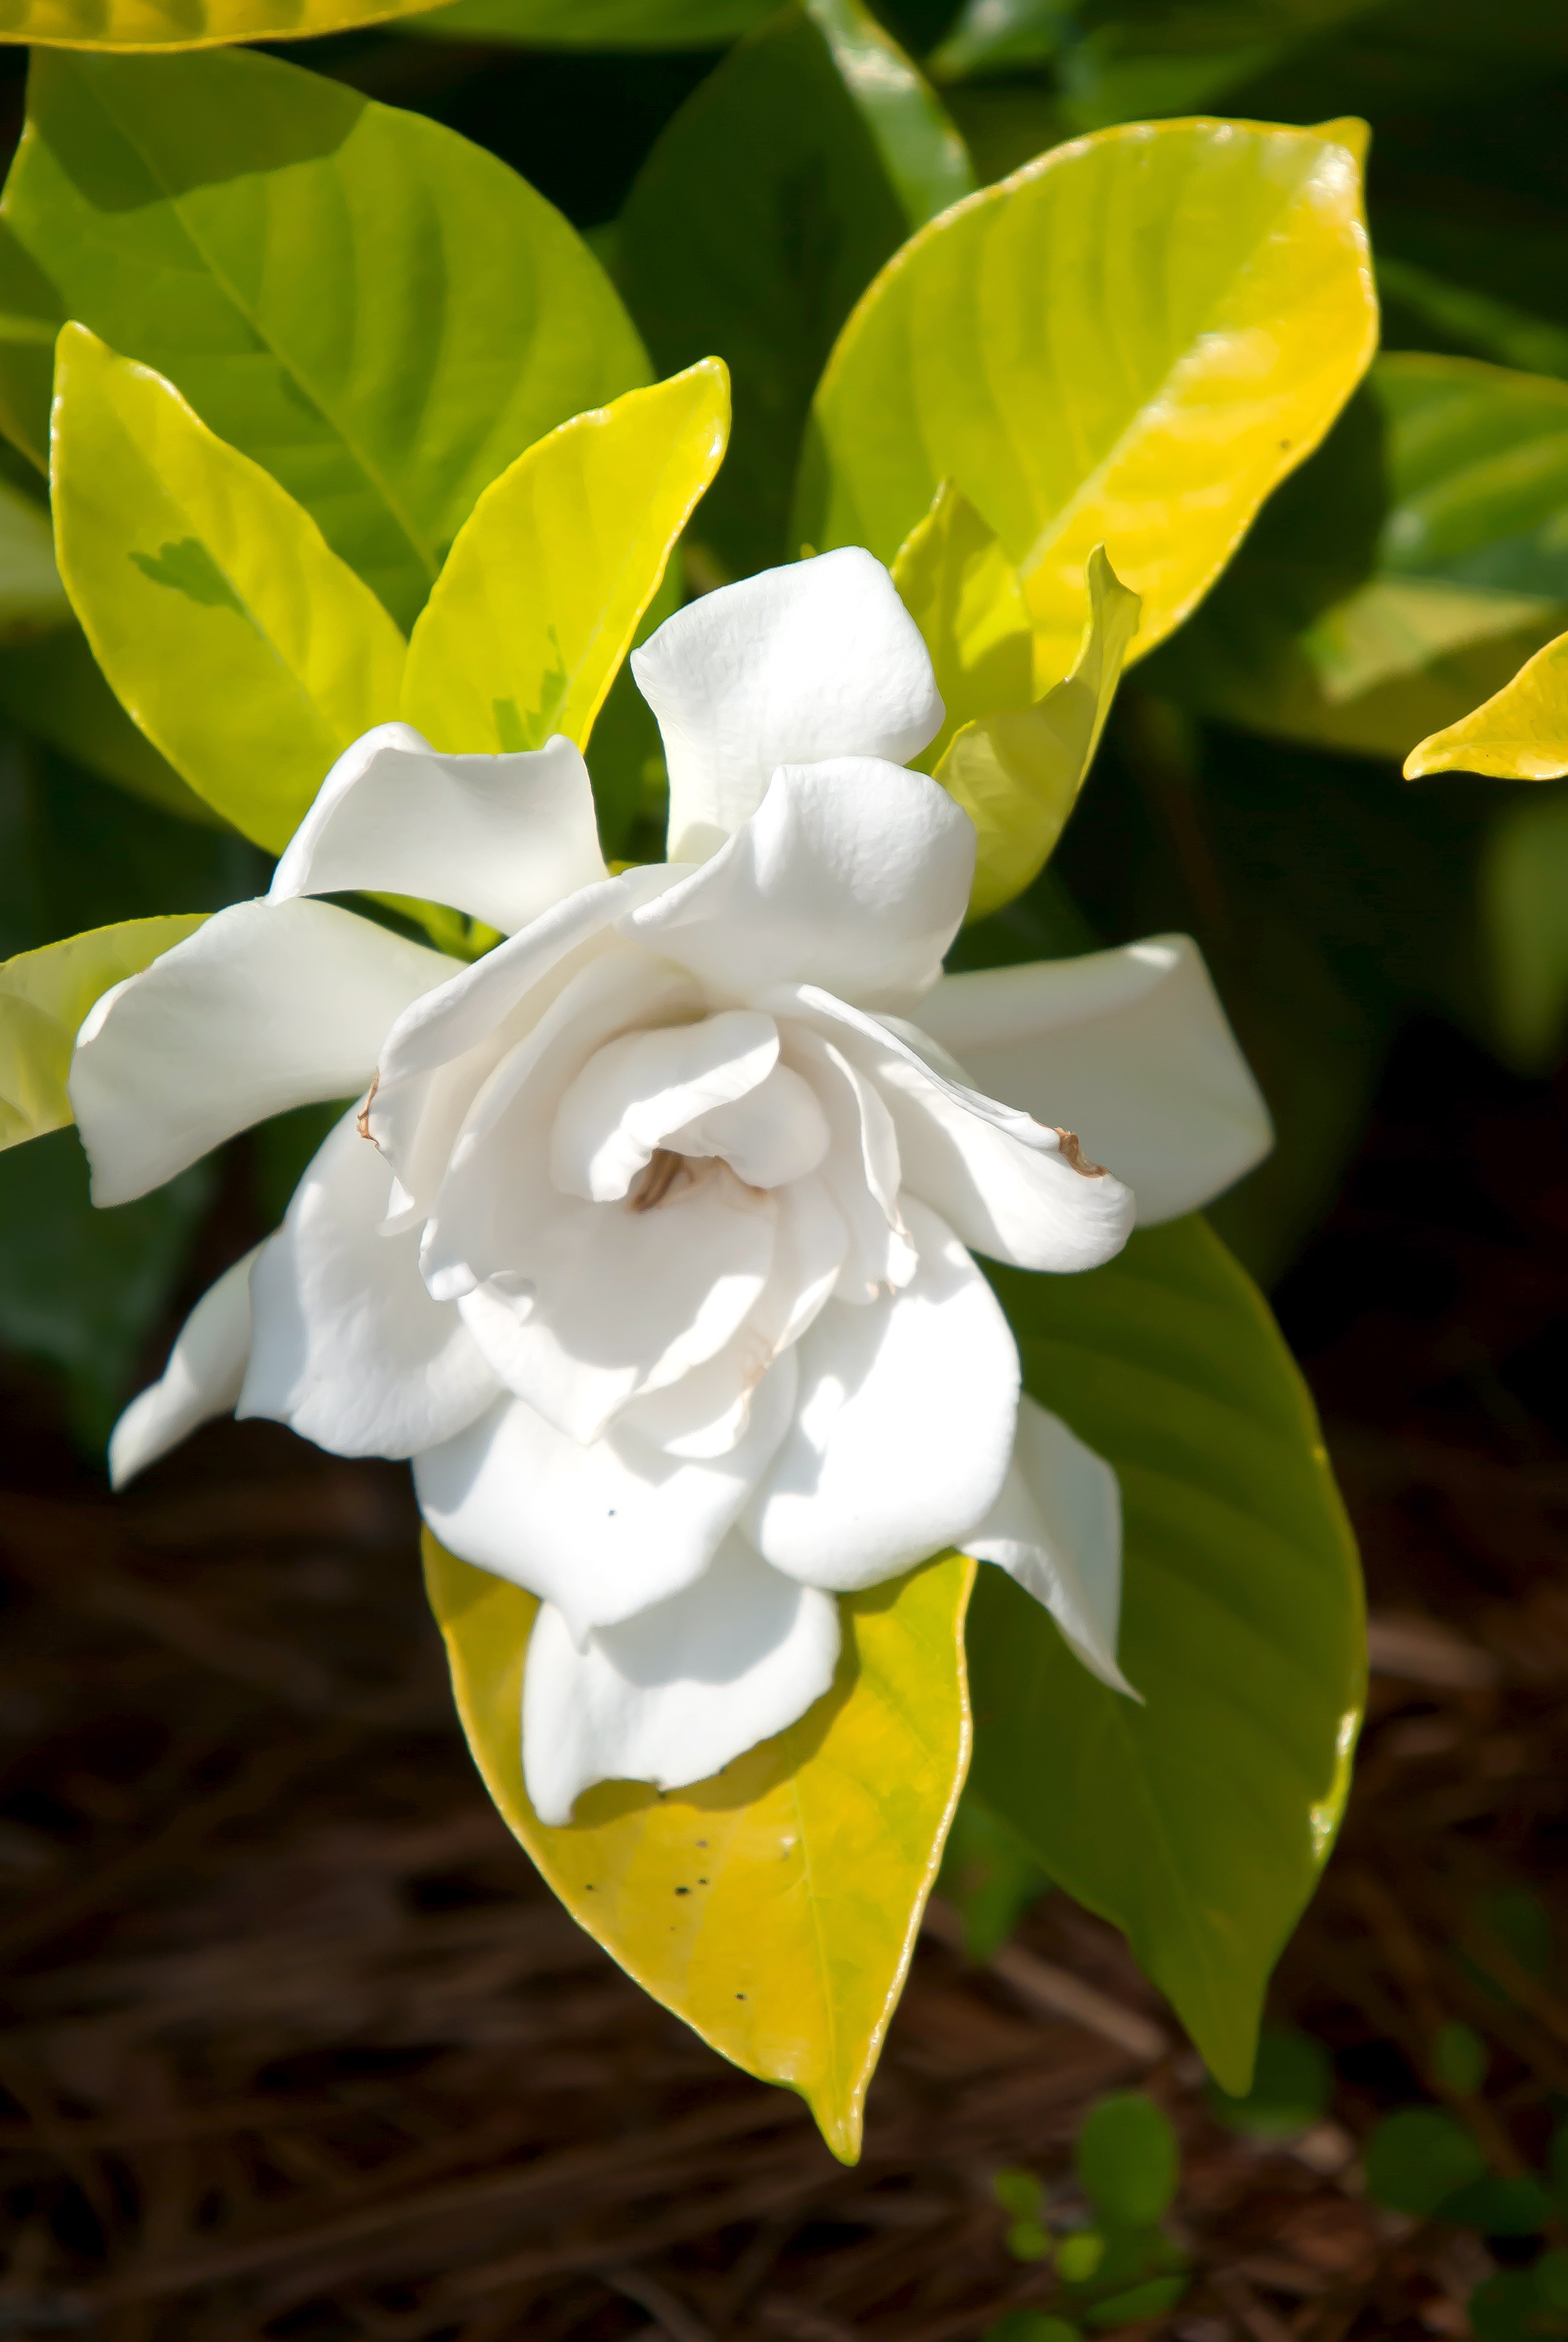 Gold Doubloon' gardenia can light up your landscape | CAES Newswire